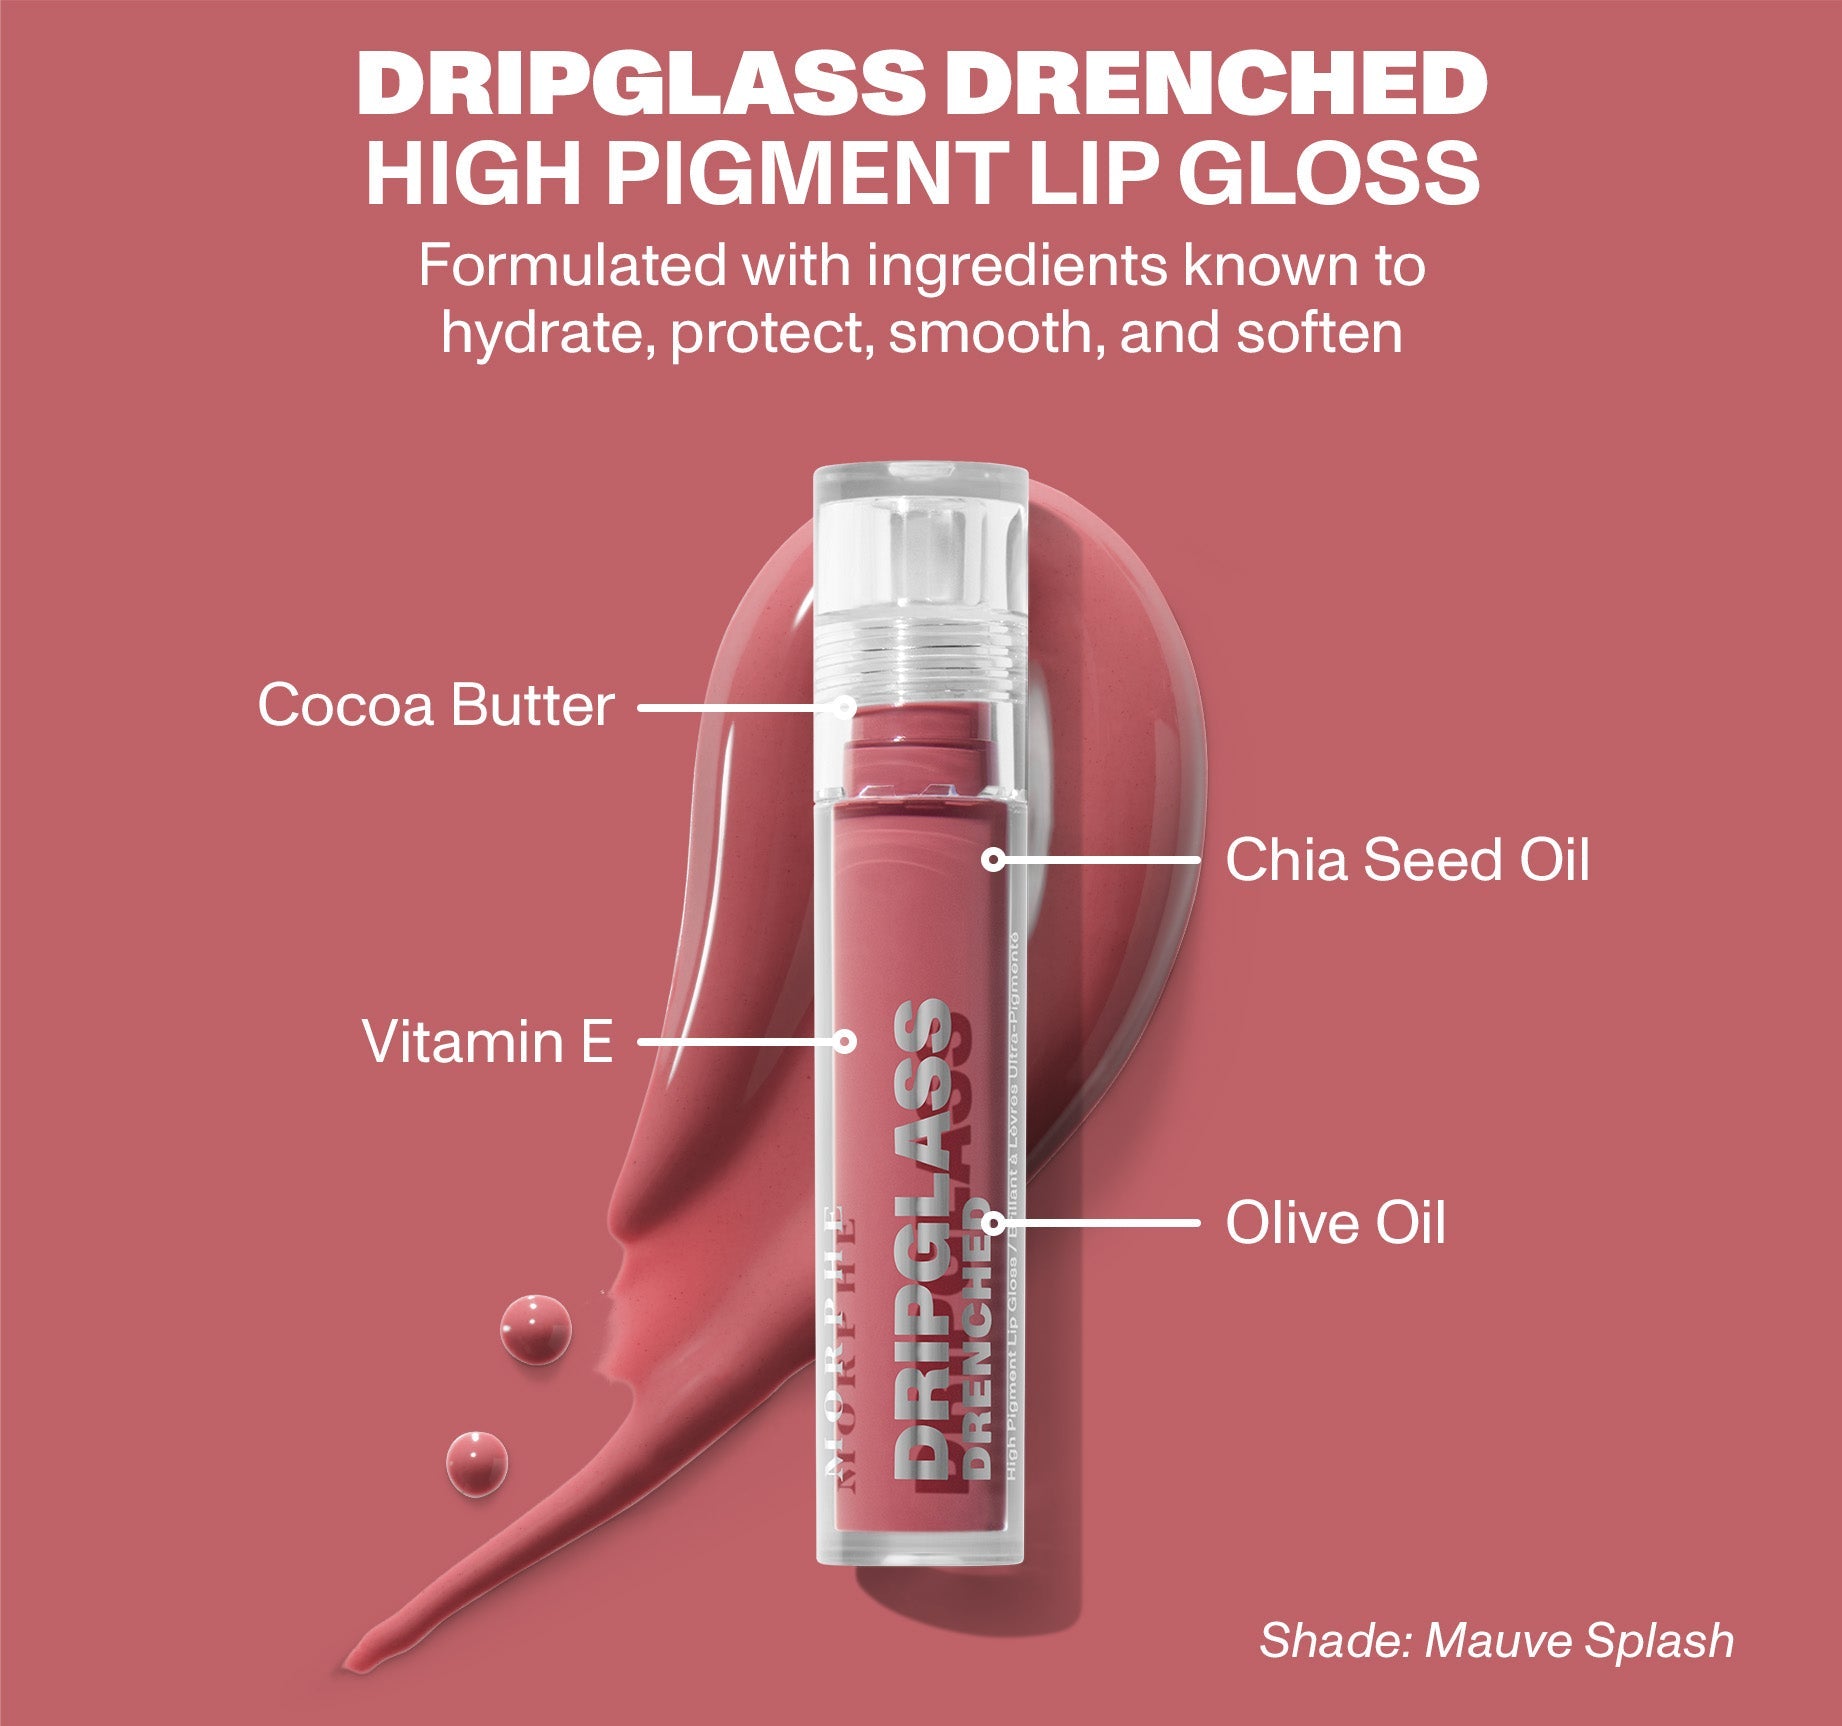 Dripglass Drenched High Pigment Lip Gloss - Morphe